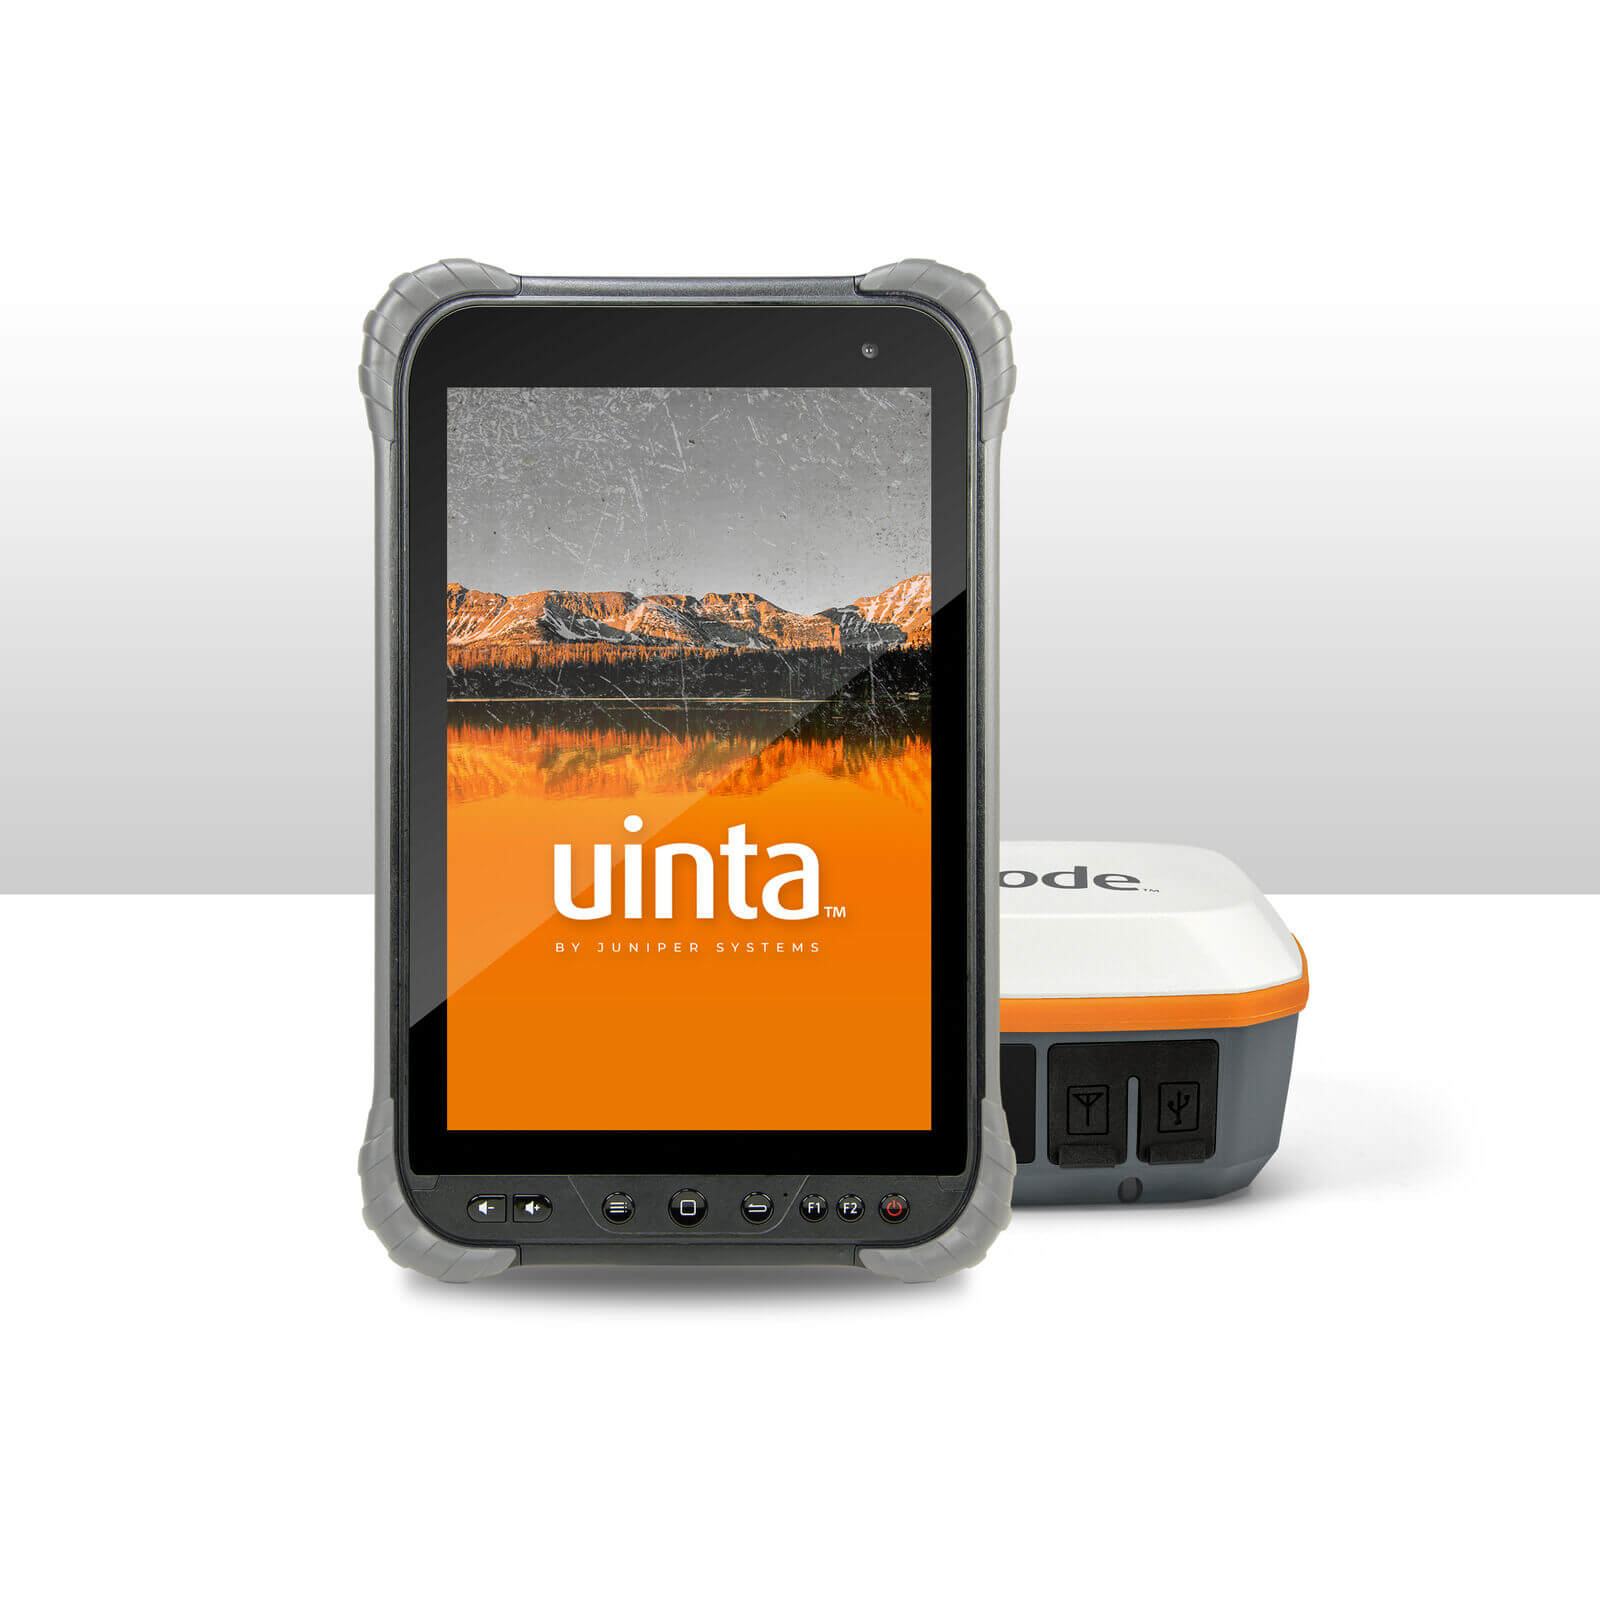 CT8X2 Rugged Tablet with Uinta Mapping Software and Geode GNS3 GNSS Receiver.